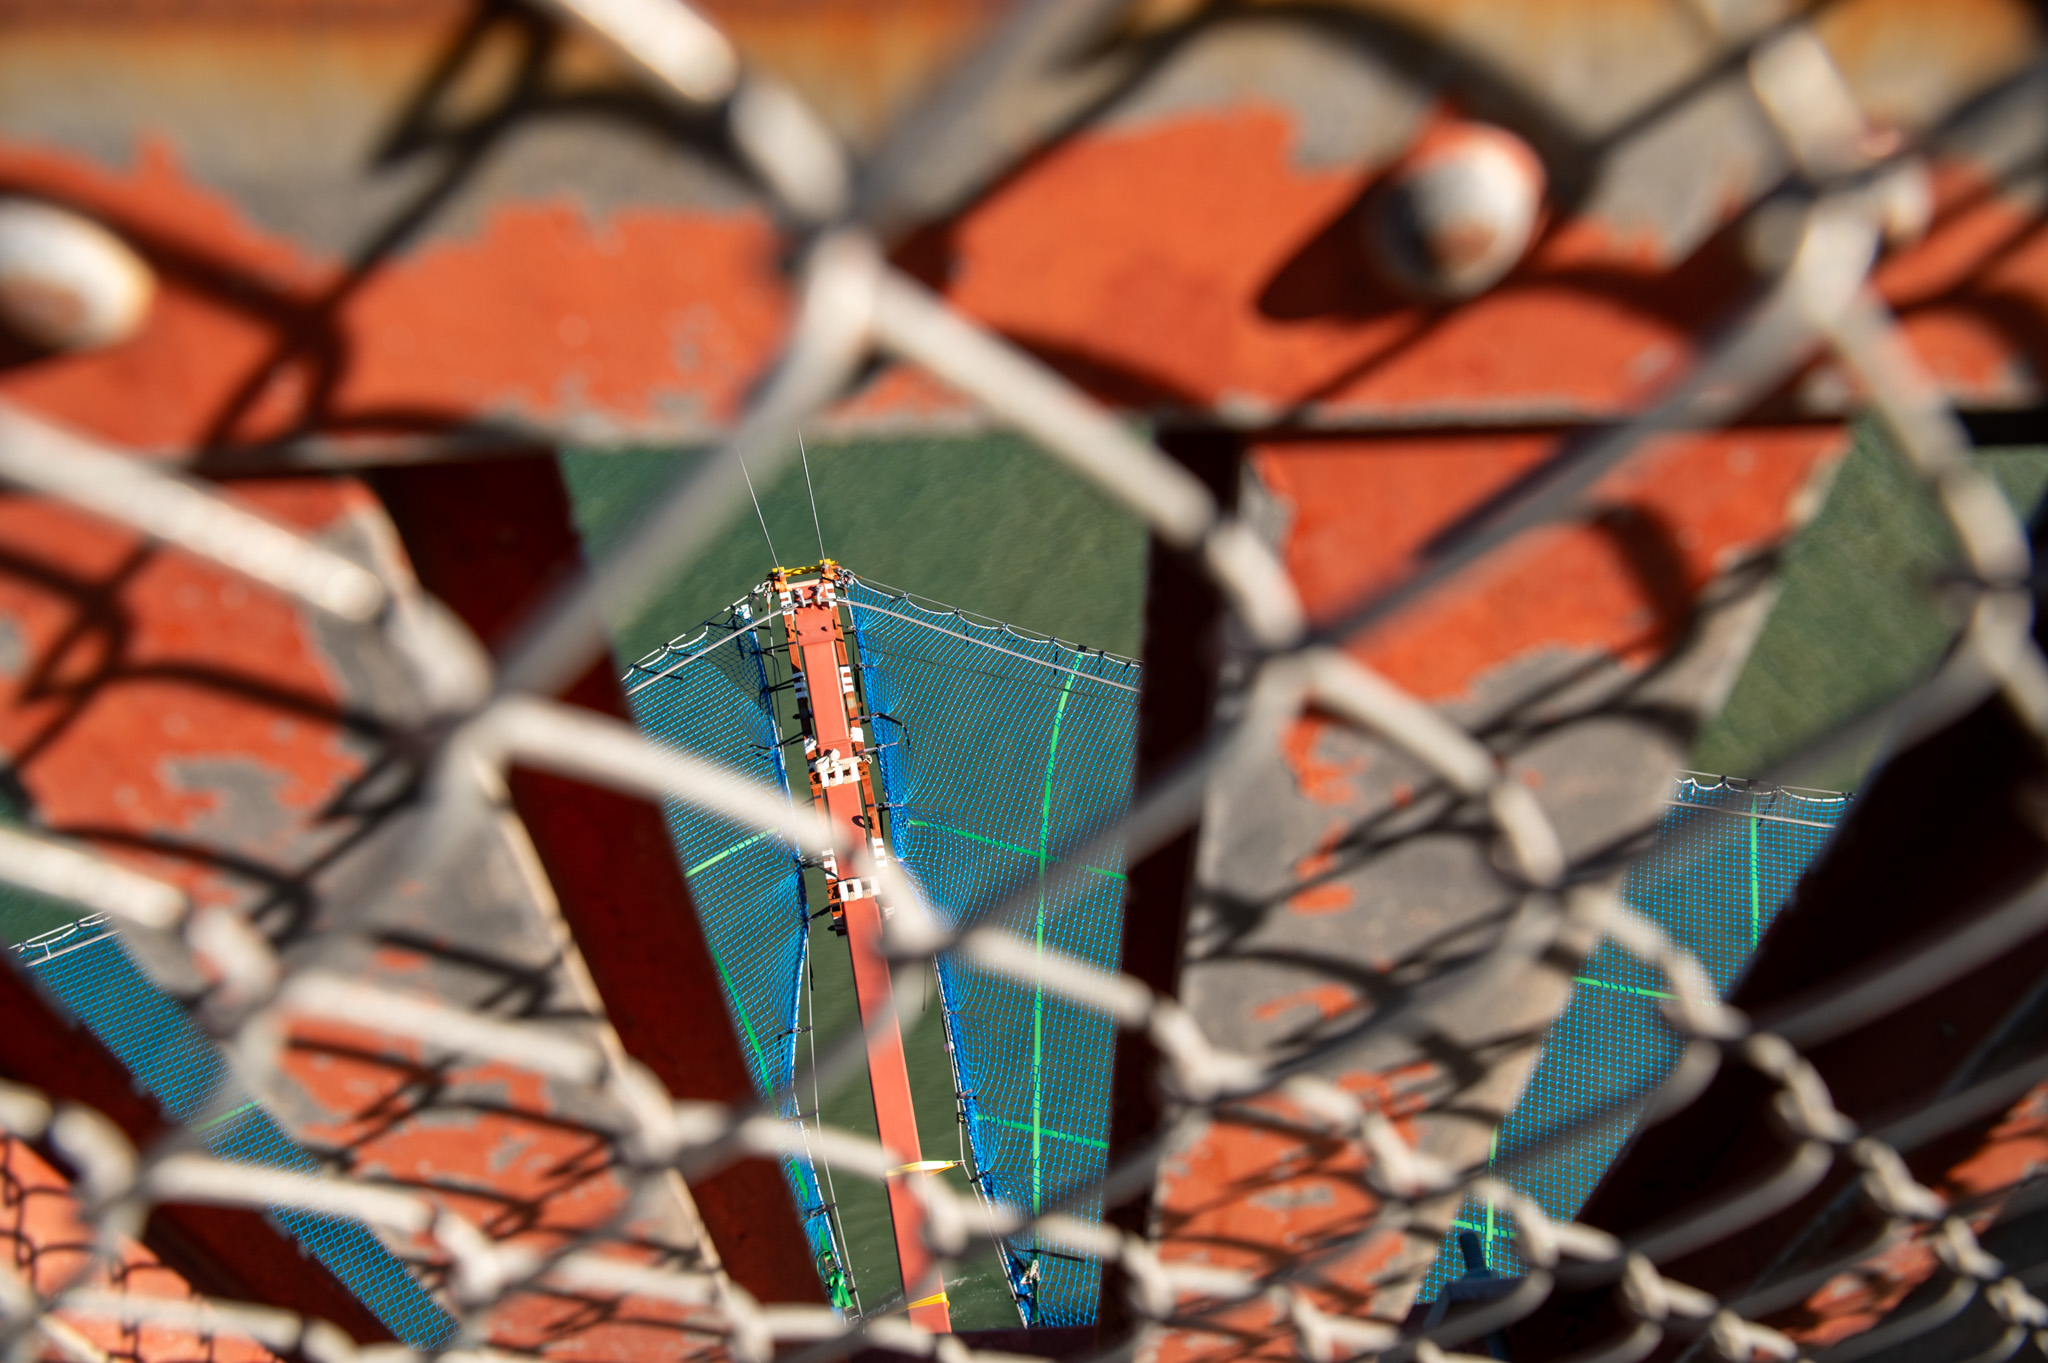 A net is seen through a chain link fence off of a red bridge